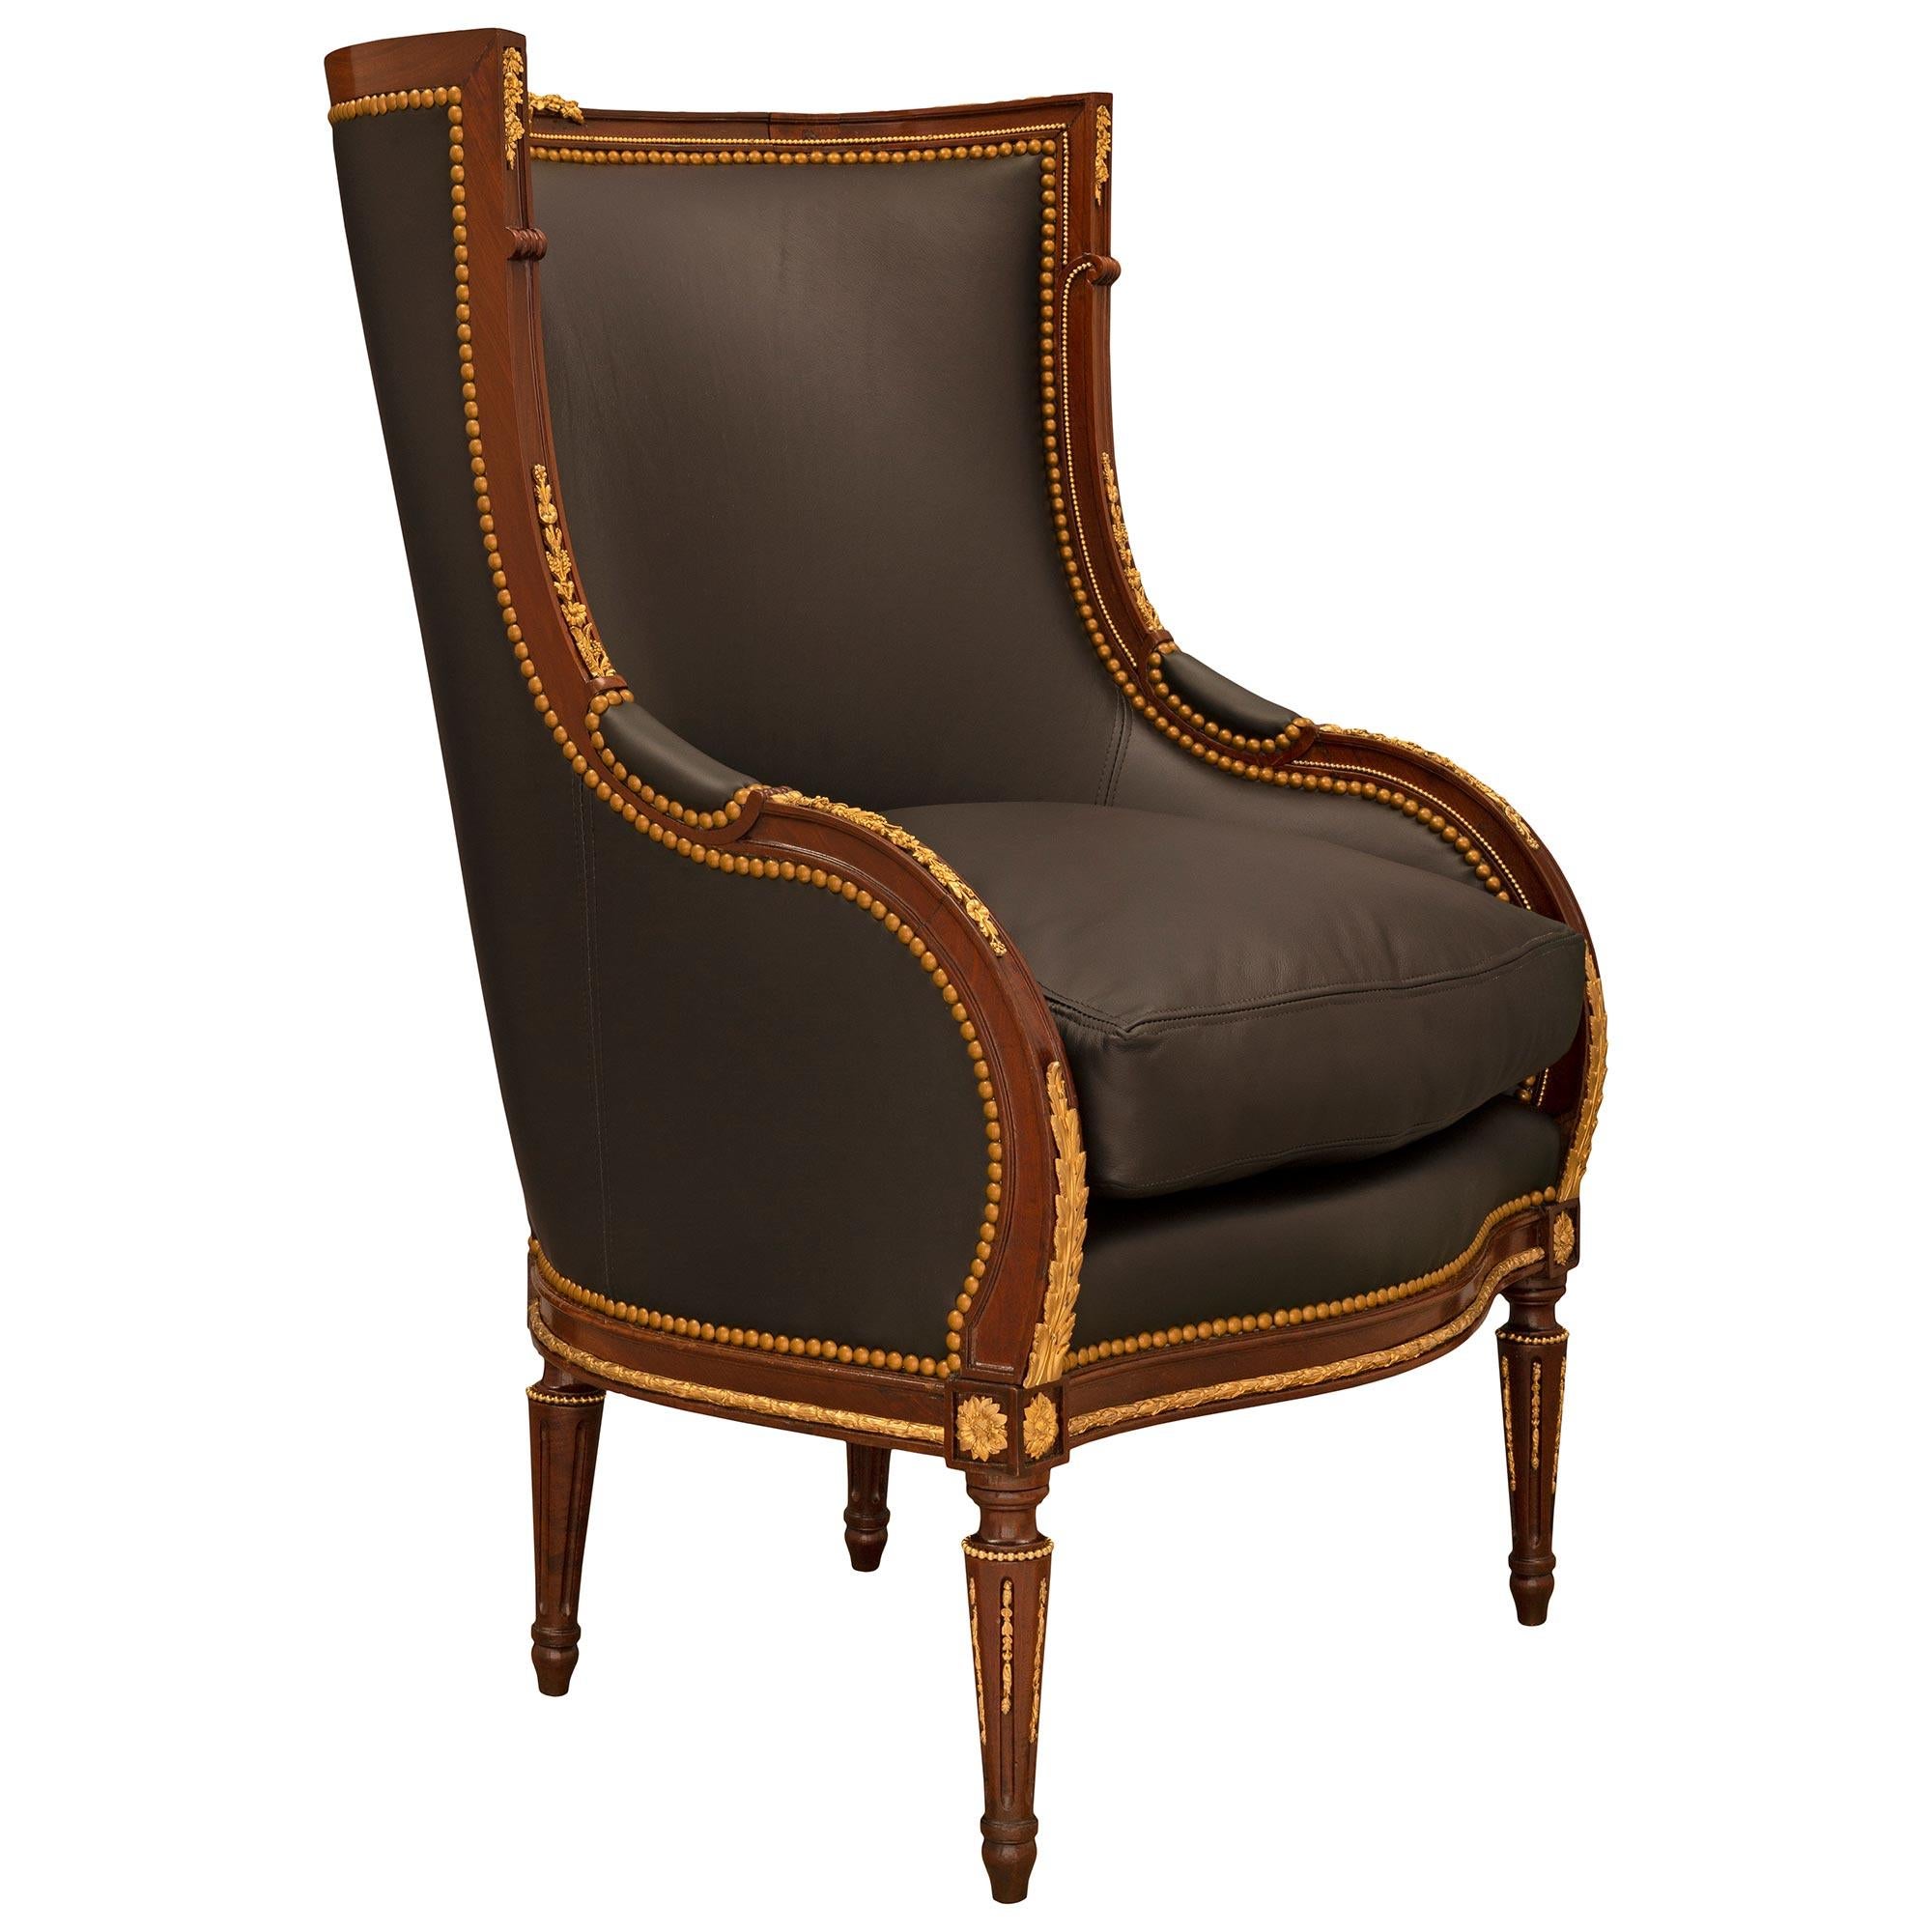 A striking and most elegant French 19th century Louis XVI st. Mahogany and ormolu armchair. The chair is raised by fine circular fluted tapered legs with topie shaped feet, lovely fitted foliate ormolu chandelles, and a wrap around beaded band.